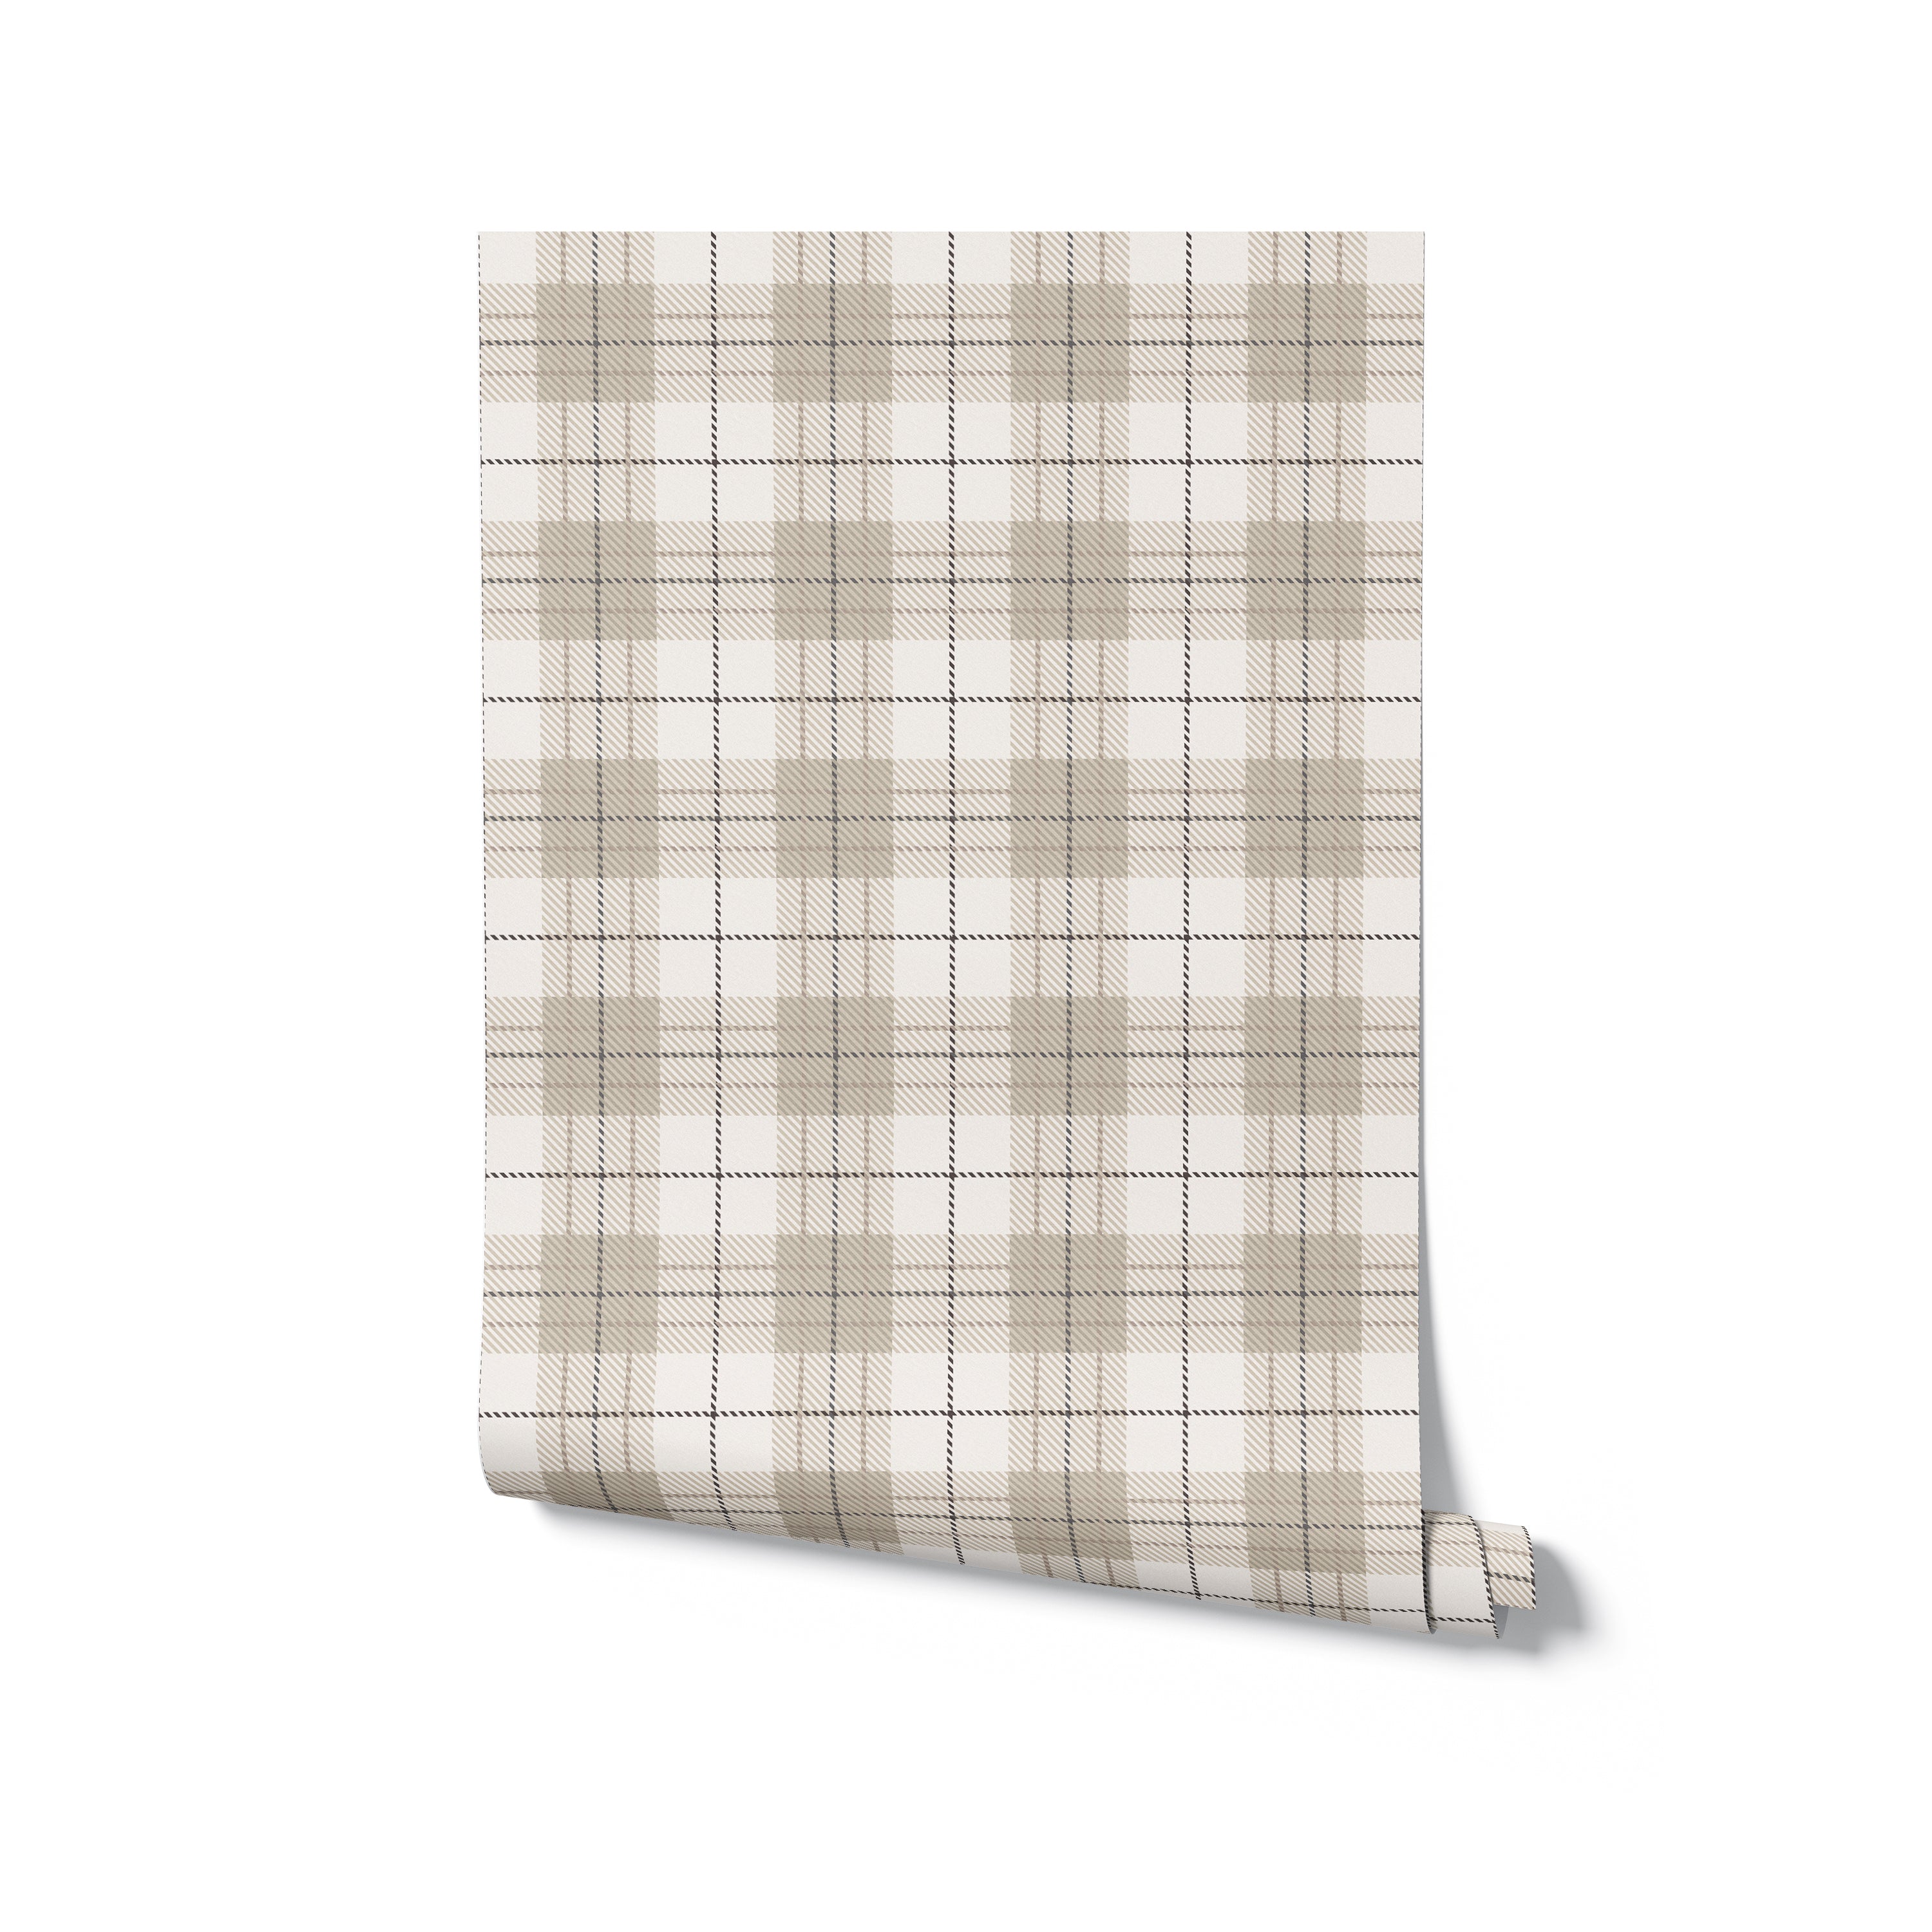 A single roll of Winter Plaid Wallpaper, revealing the intricate pattern of beige, brown, and white plaid. This image showcases the wallpaper's texture and pattern continuity, perfect for visualizing its effect in a home setting before purchase.